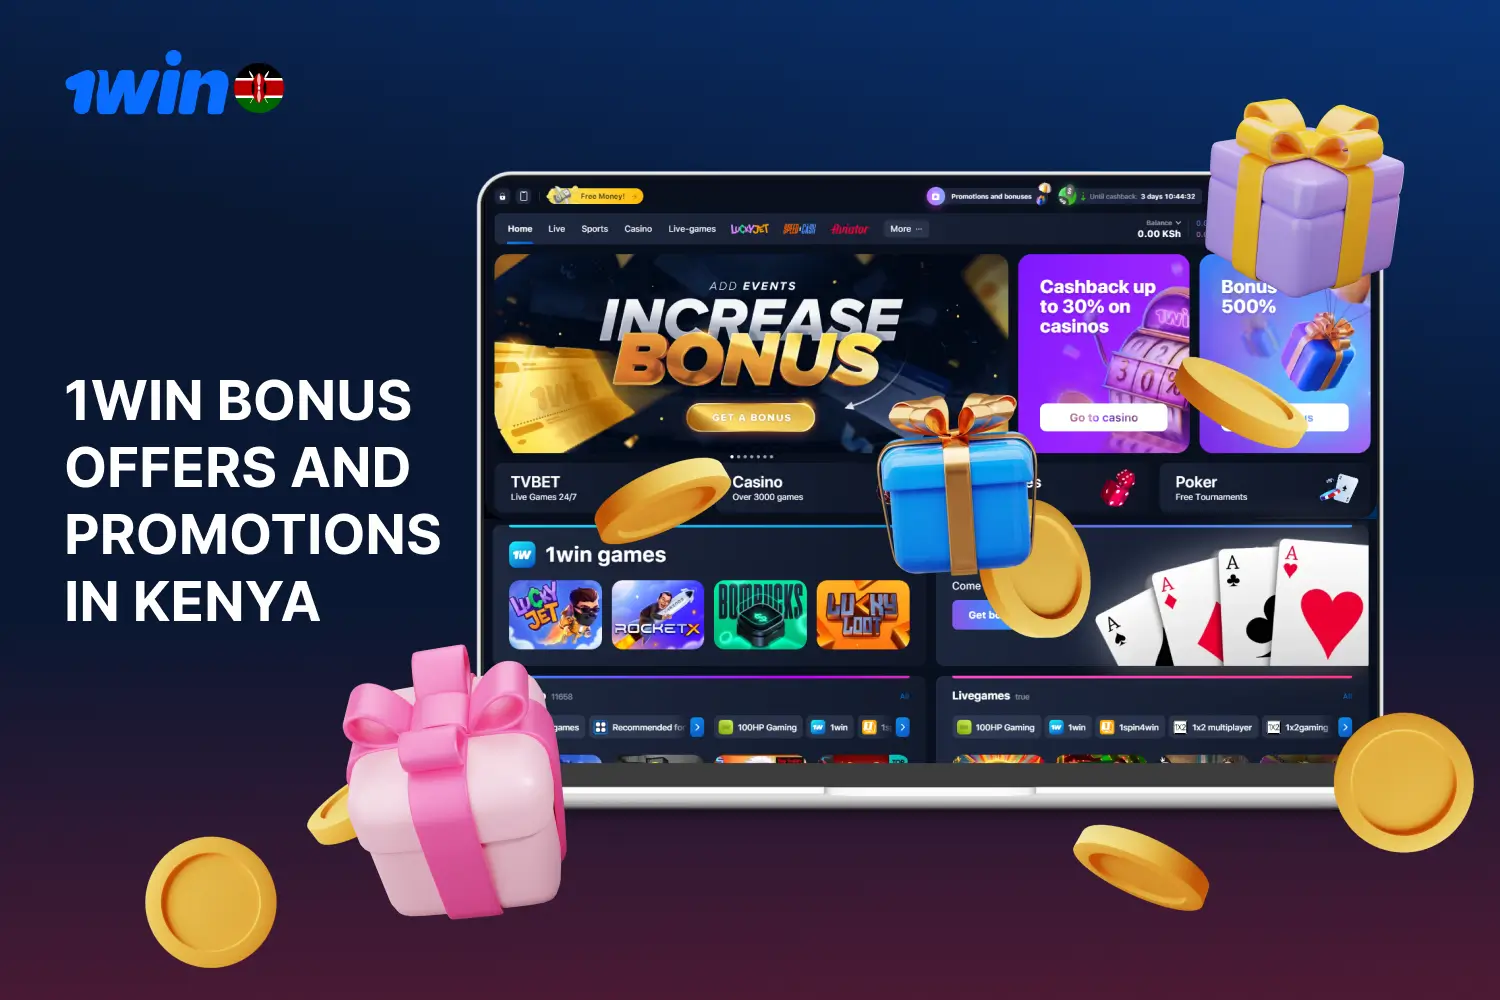 Players in Kenya can use of various 1win casino promotions and receive bonuses